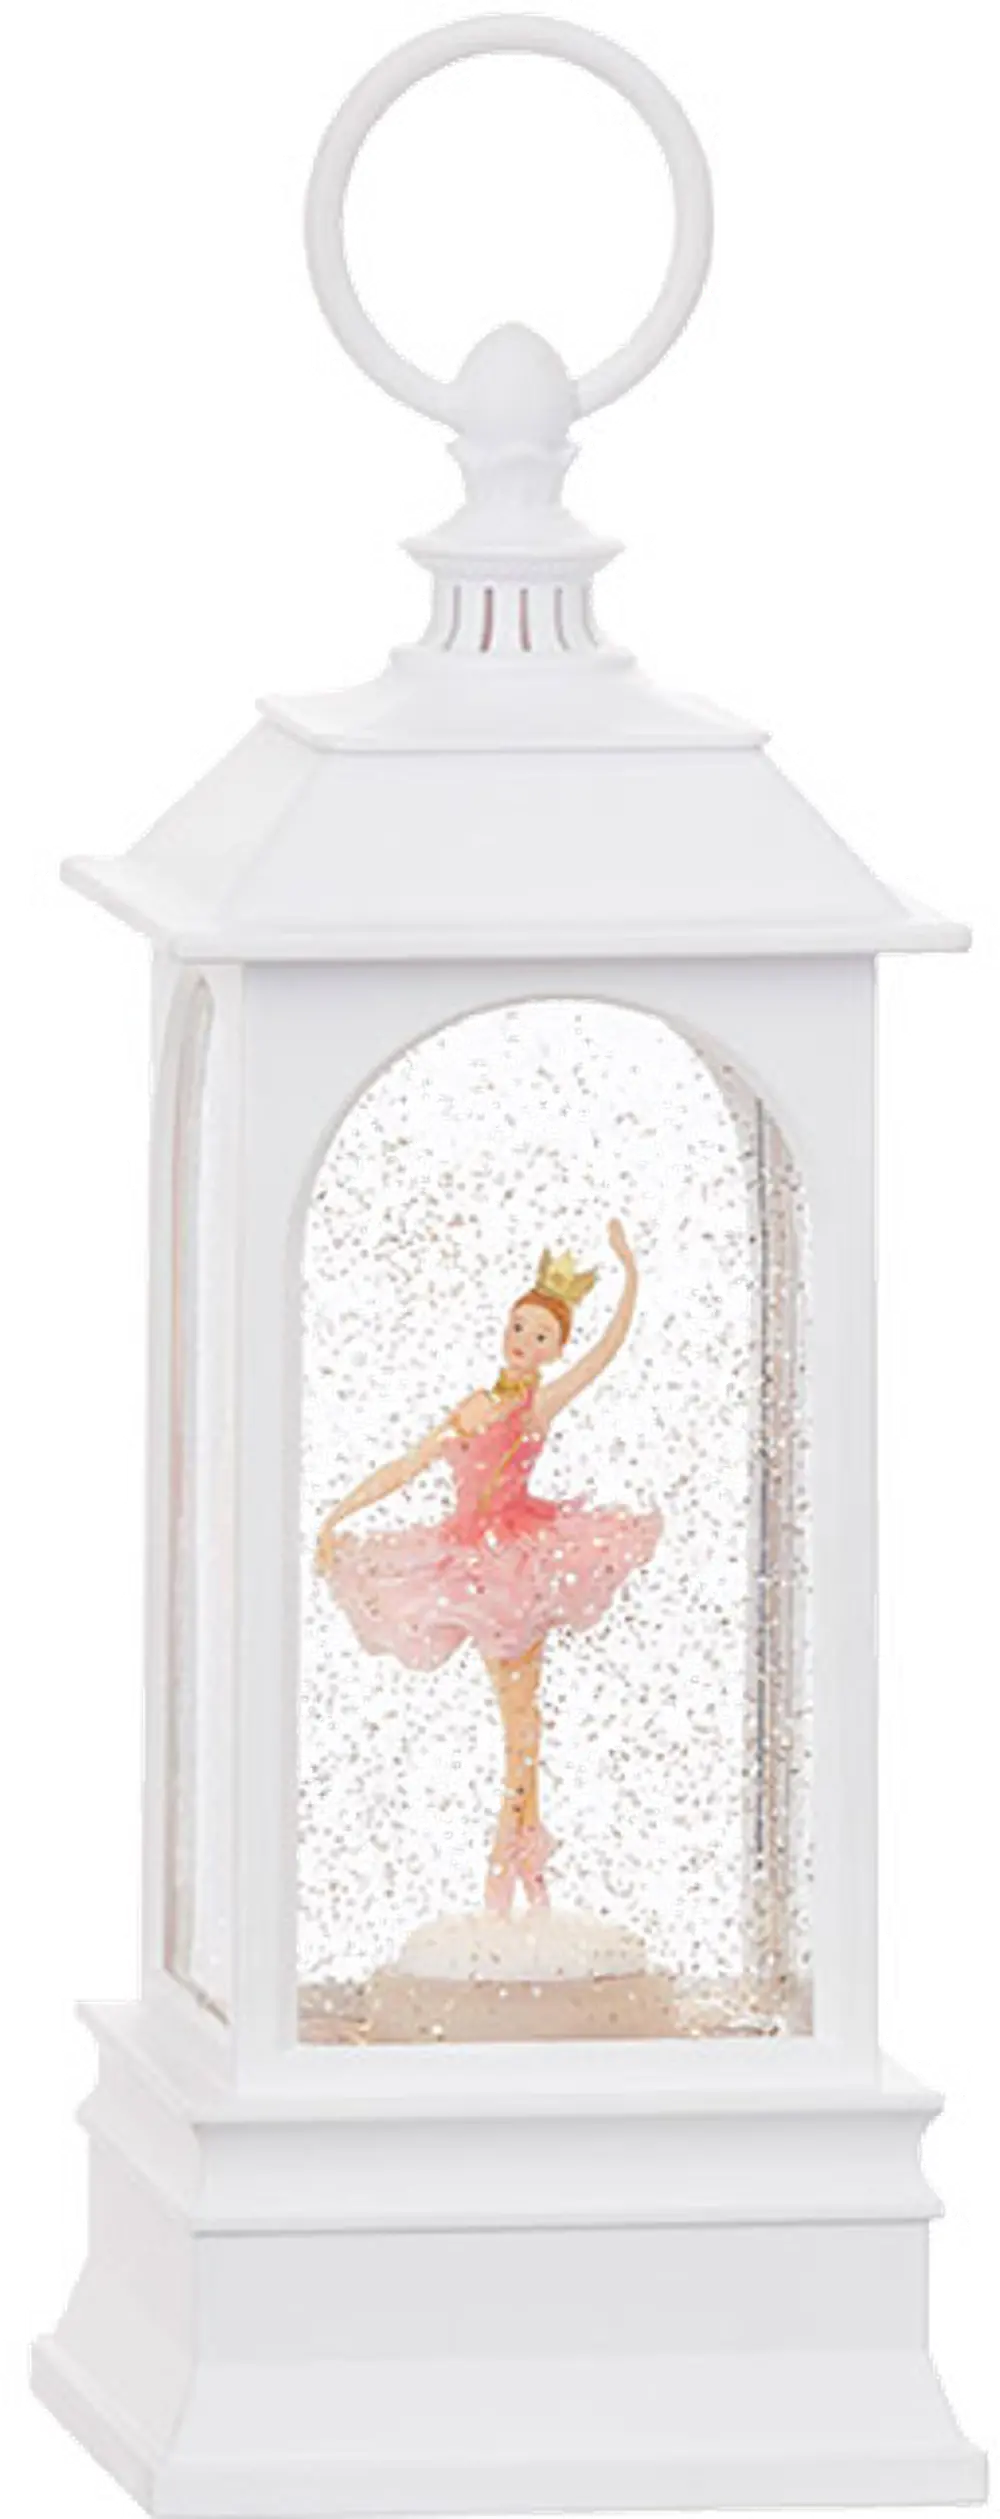 9 Inch White and Pink Ballerina Musical Lighted Lantern-1